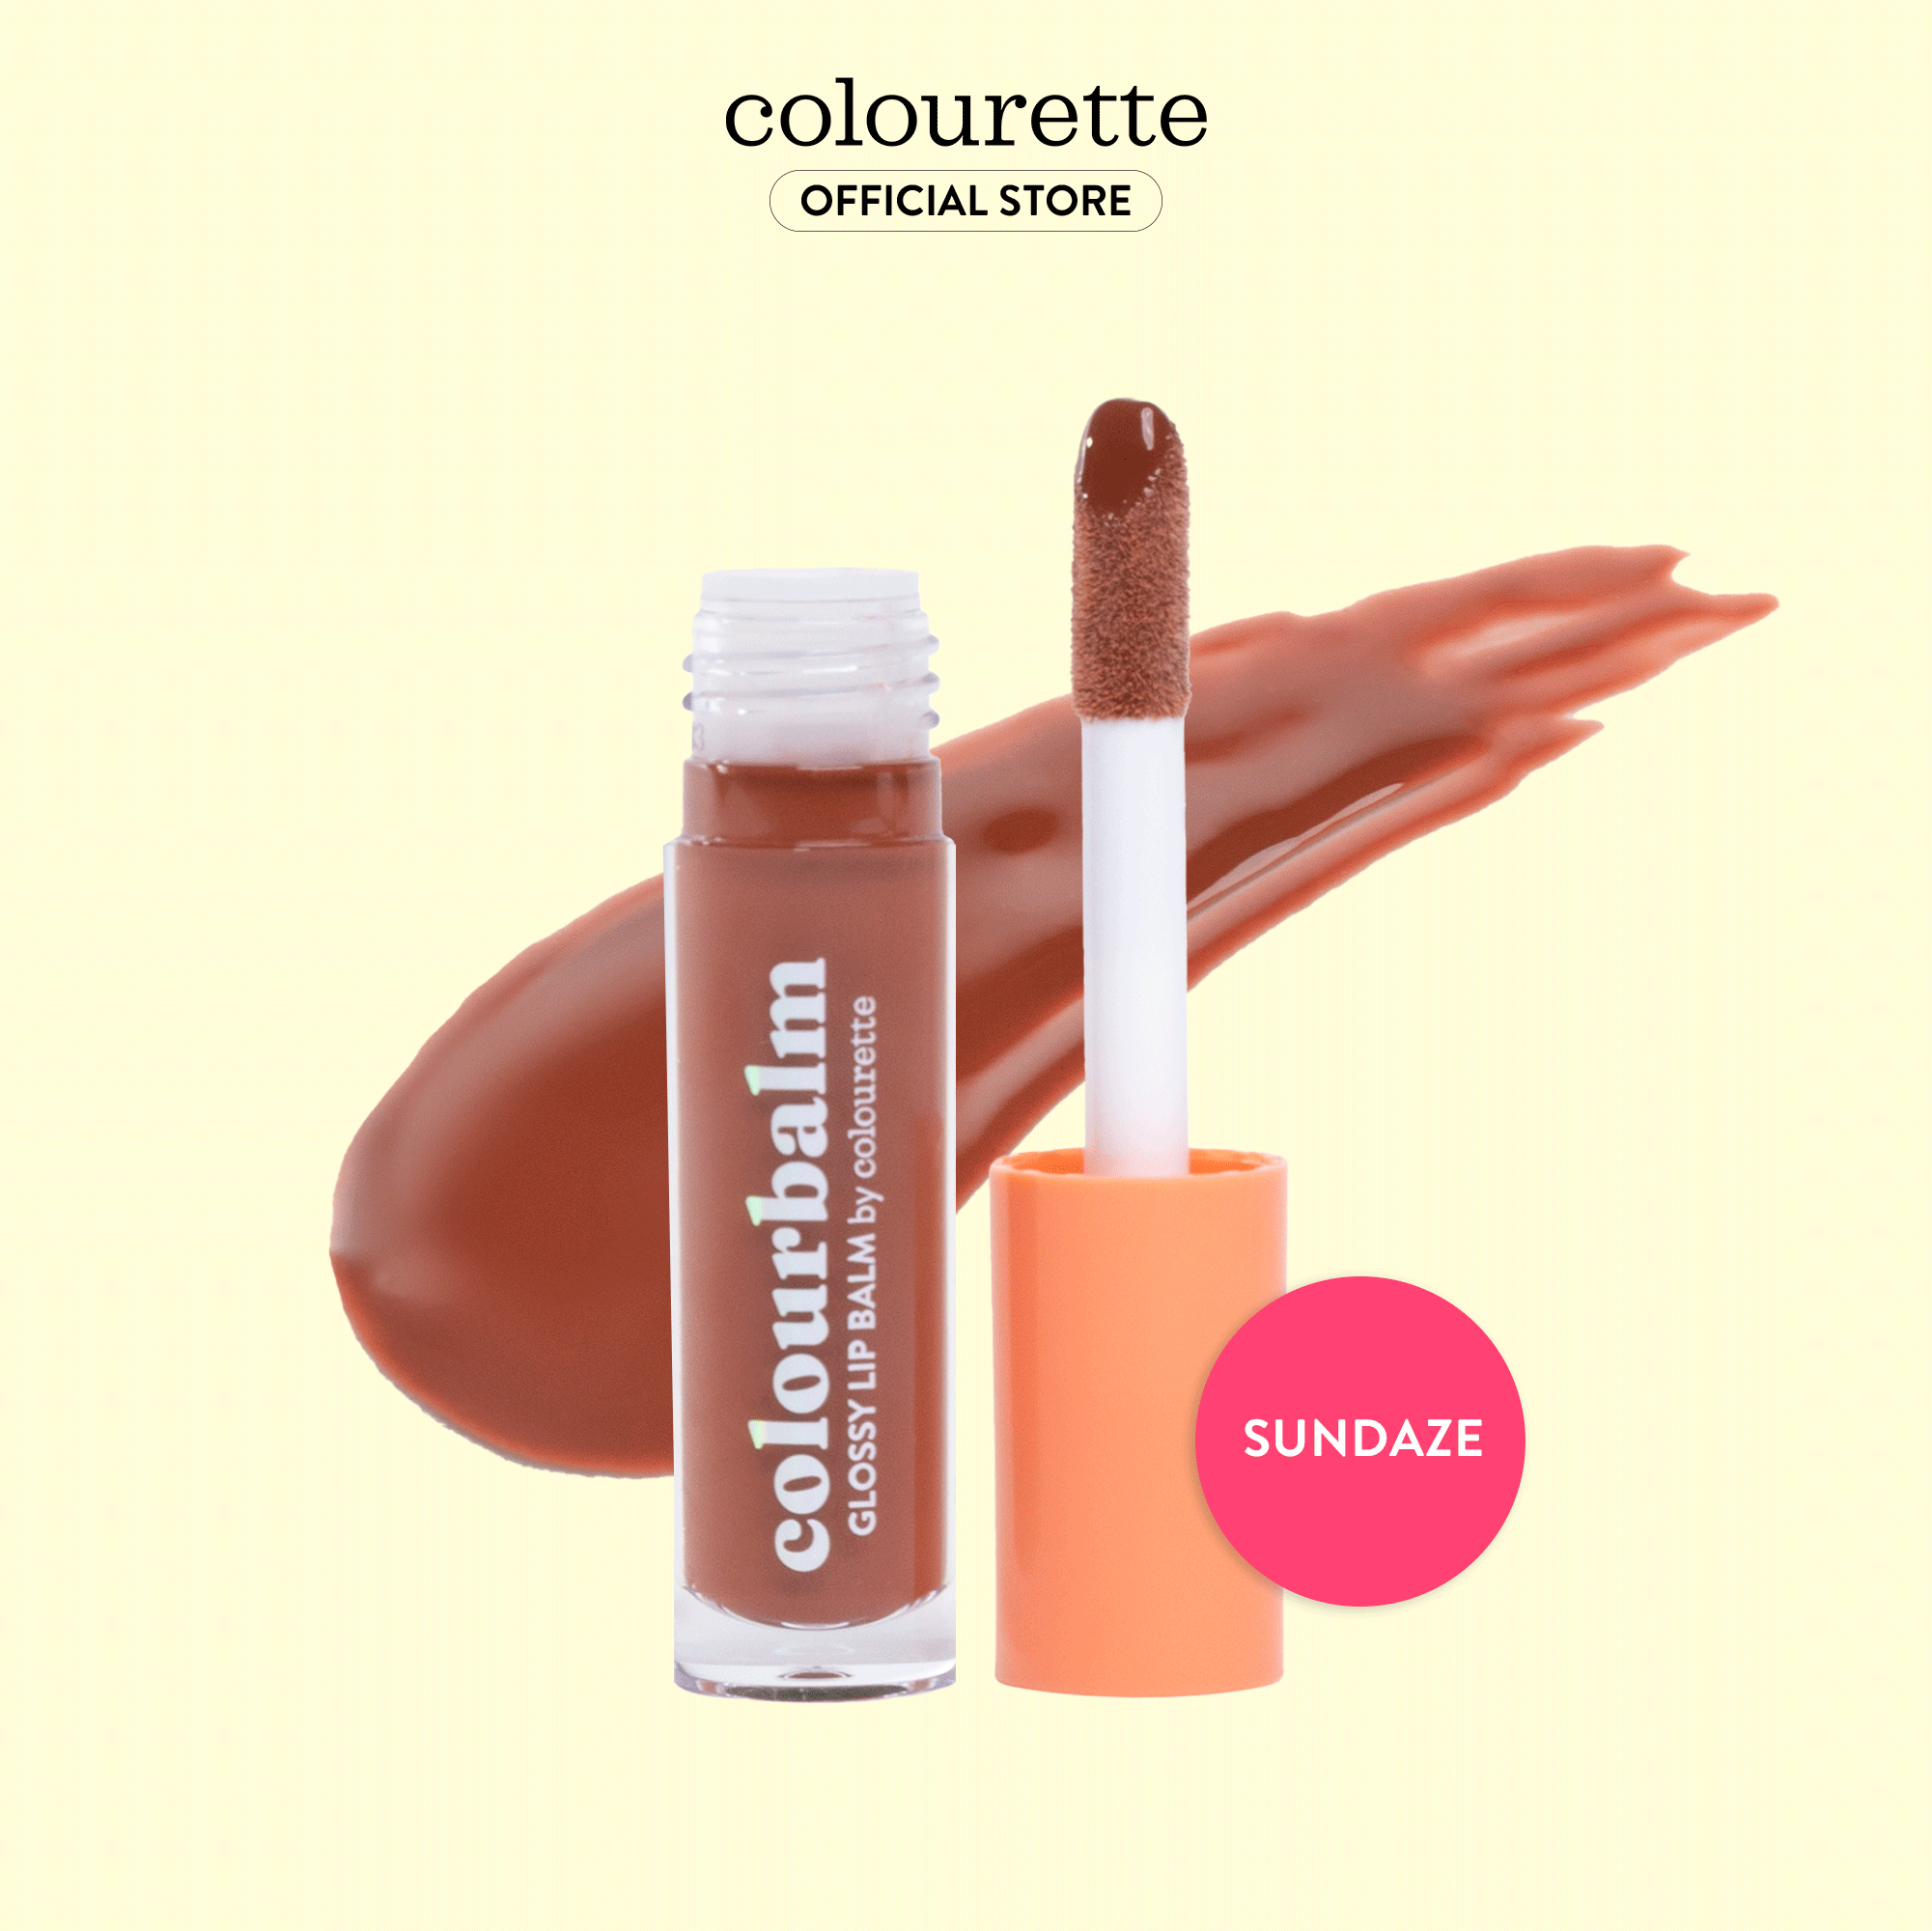 Isolated image of Colourette Cosmetics Colourbalm in shade Sundaze, a dual-purpose lip balm and light gloss. The product is showcased in sleek, leak-proof tube packaging, equipped with a thick doe-foot applicator for precise application. Its creamy and glossy texture, formulated with vegan and cruelty-free ingredients including Candelilla Wax and infused with Vitamin E, promises to hydrate and nourish lips. Perfect for those seeking an everyday, natural-looking color and gloss.